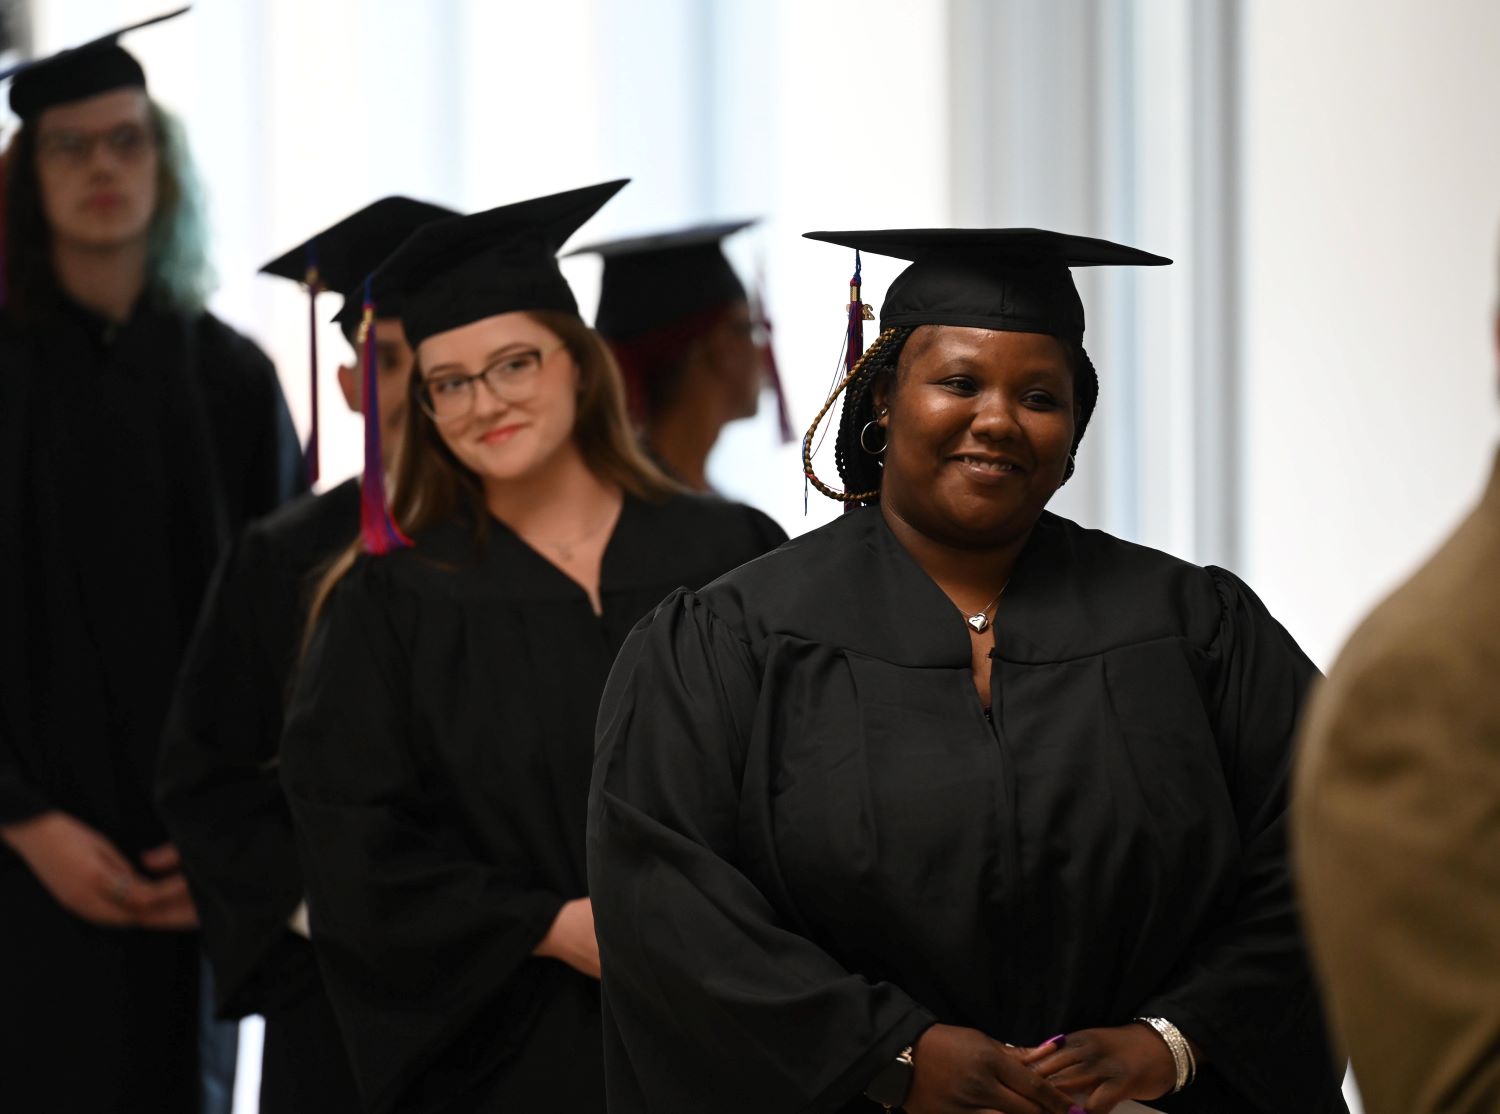 GED students lined up in cap and gown at graduation